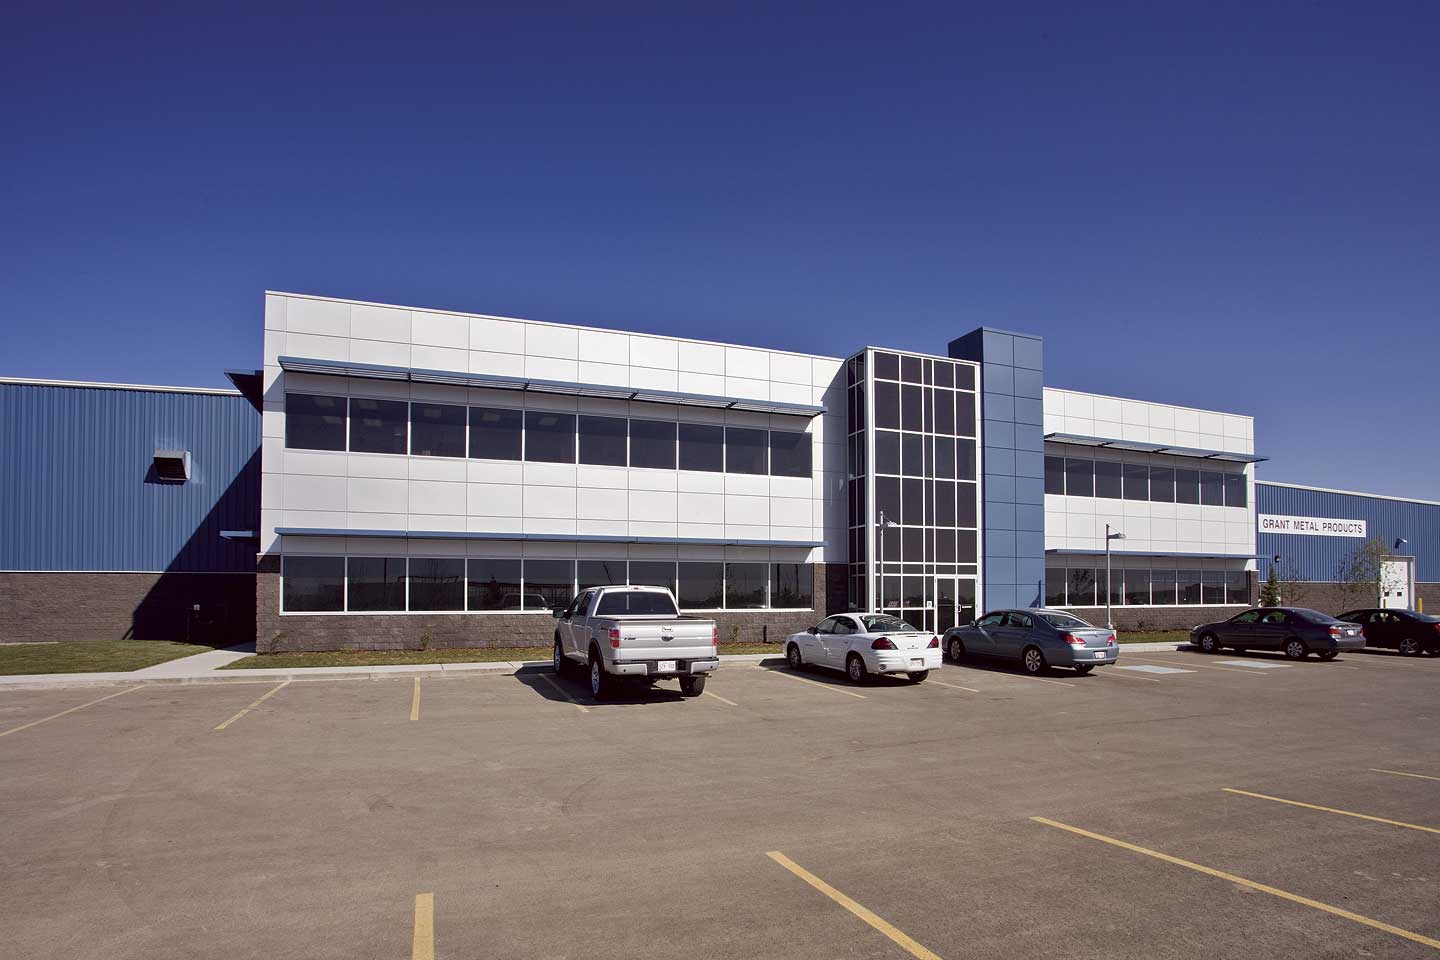 Grant Metal Products building